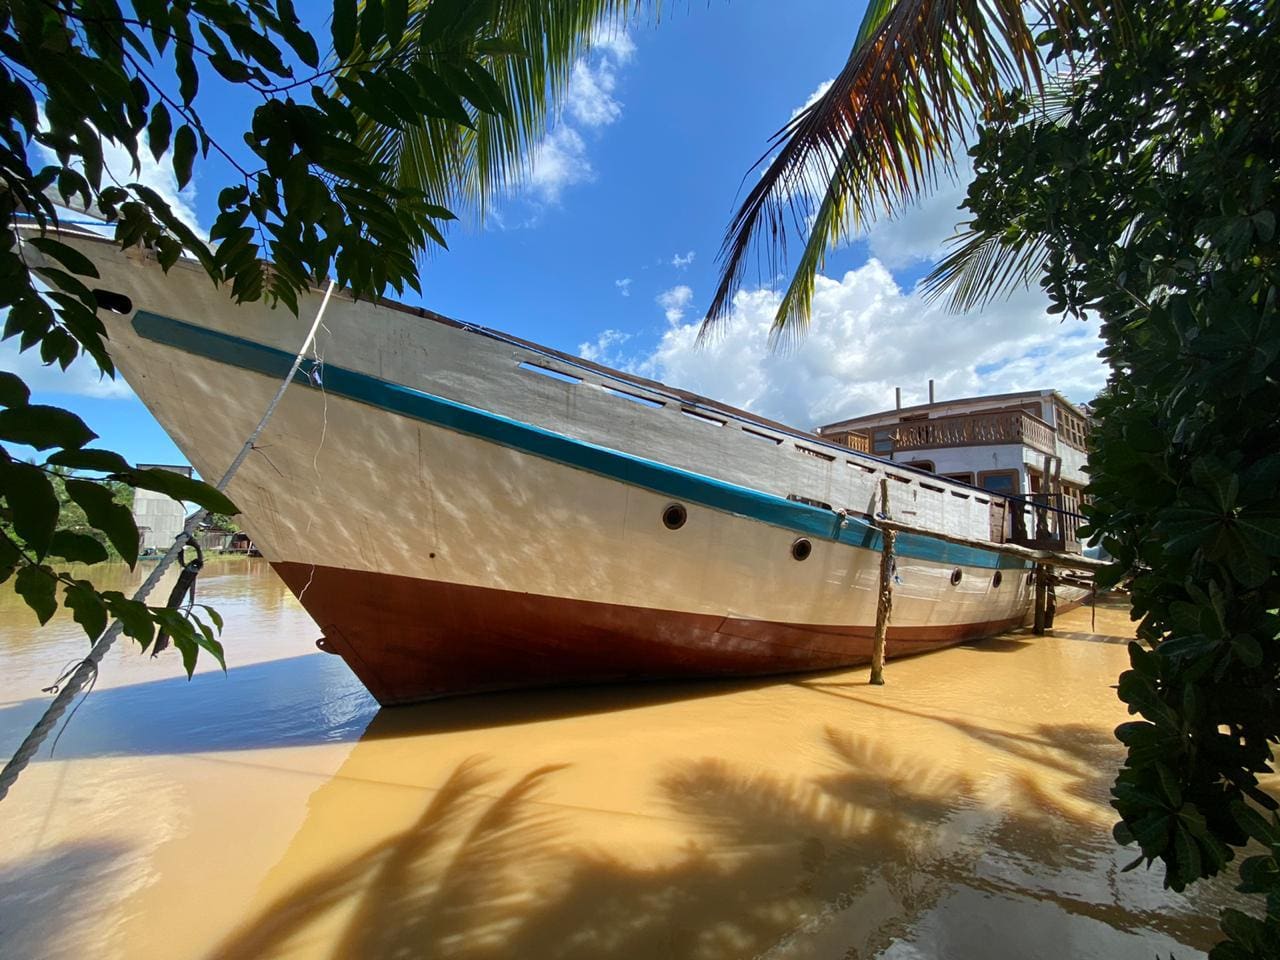 A boat docked in muddy water near a house.